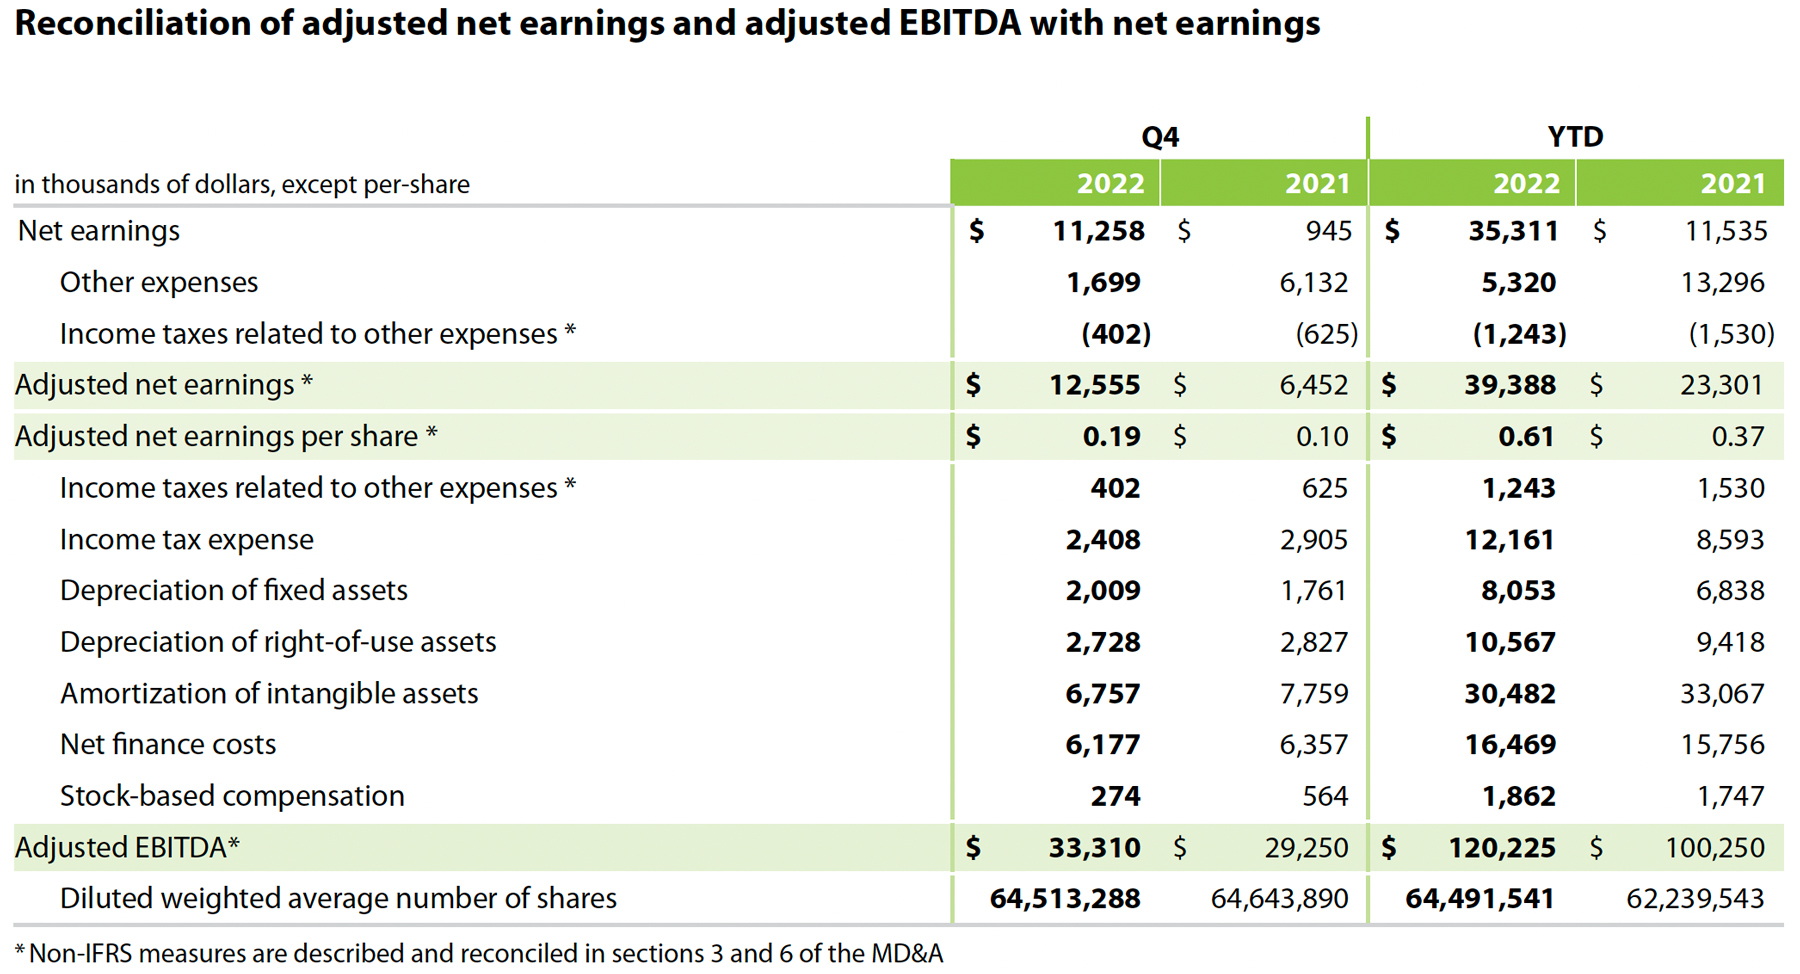 Reconciliation of adjusted net earnings and adjusted EBITDA with net earnings